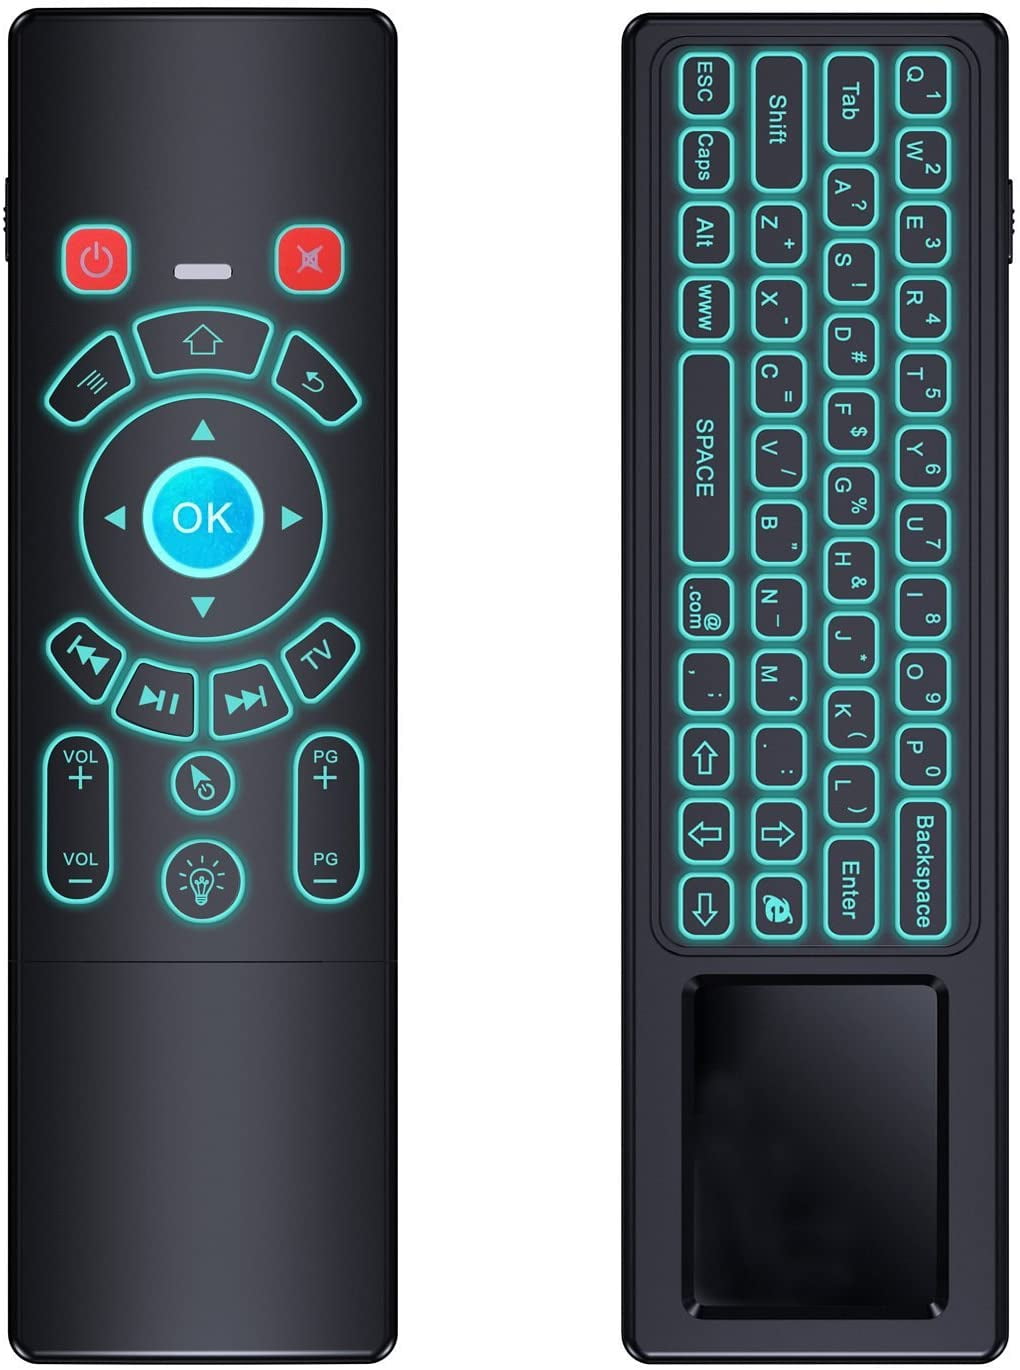 Mini 2.4GHz Wireless Keyboard Air Mouse Remote Control w/ Backlit For PC TV Box 